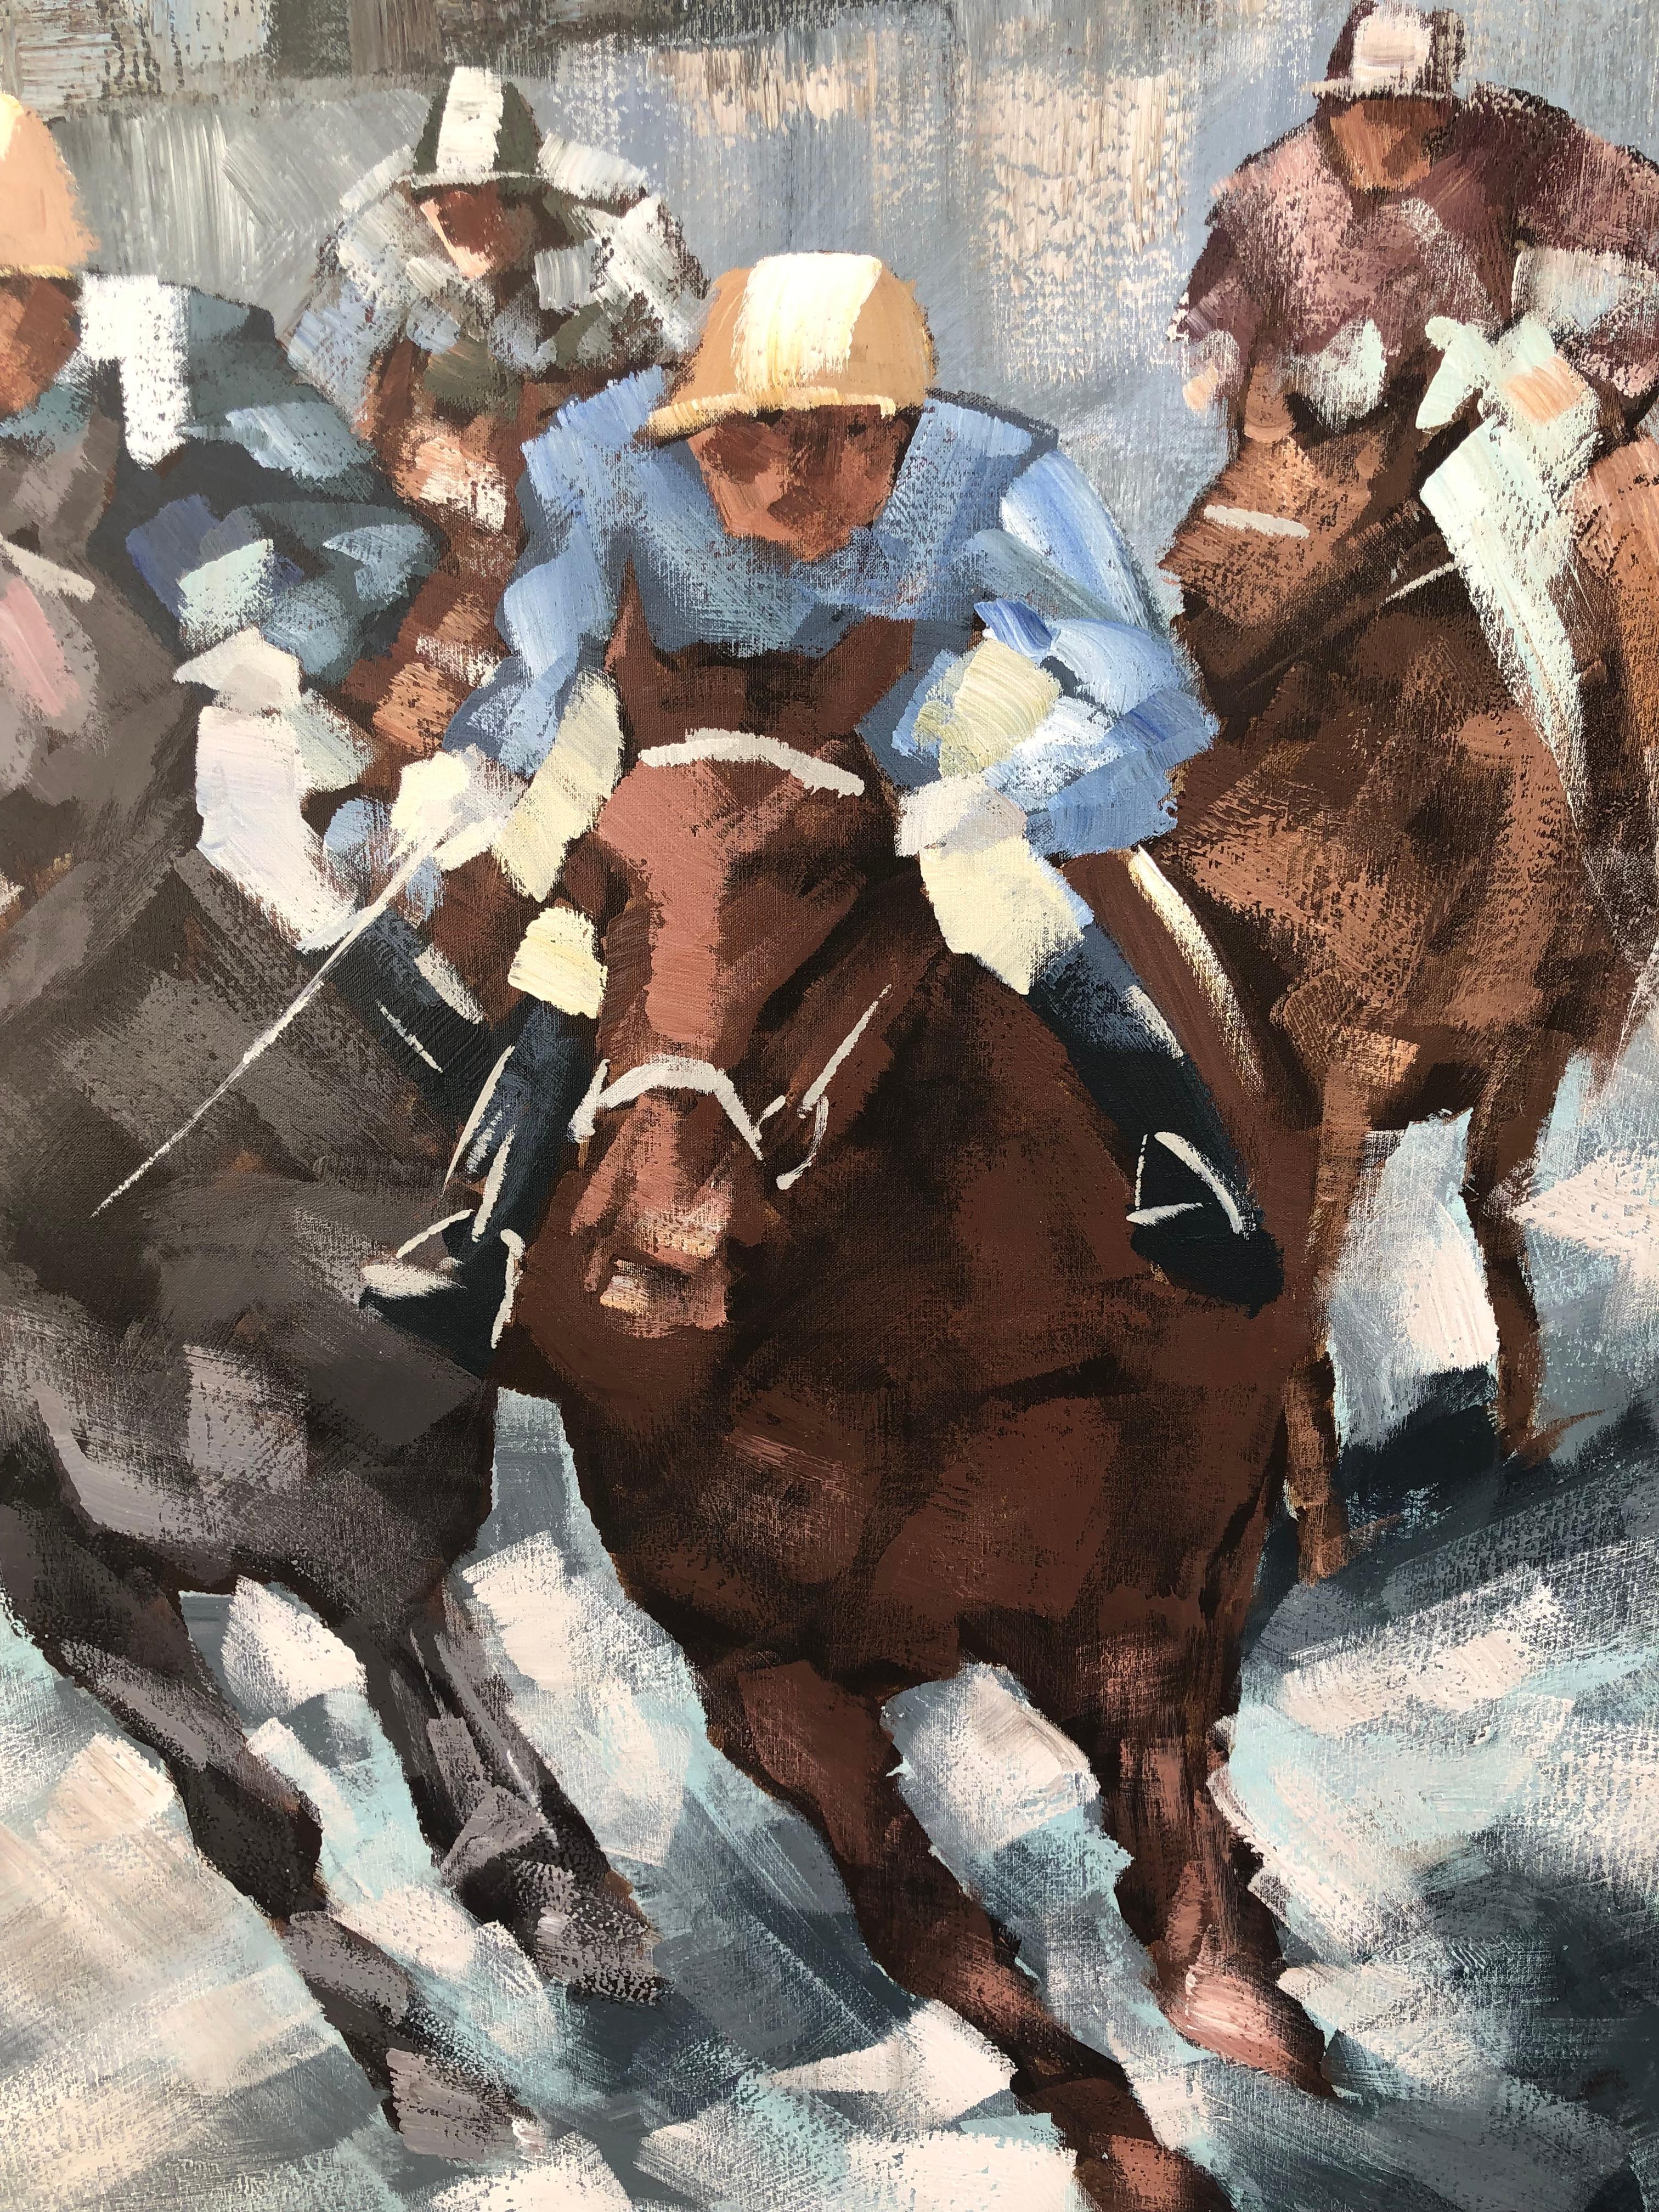 Lee Reynolds (Amer., 1936-2017)
Large oil on canvas of a steeplechase by artist Lee Reynolds who founded Vanguard Studios in Beverly Hills. CA in 1964. The commanding size of this painting in grey, blue and brown color palette, coupled with the